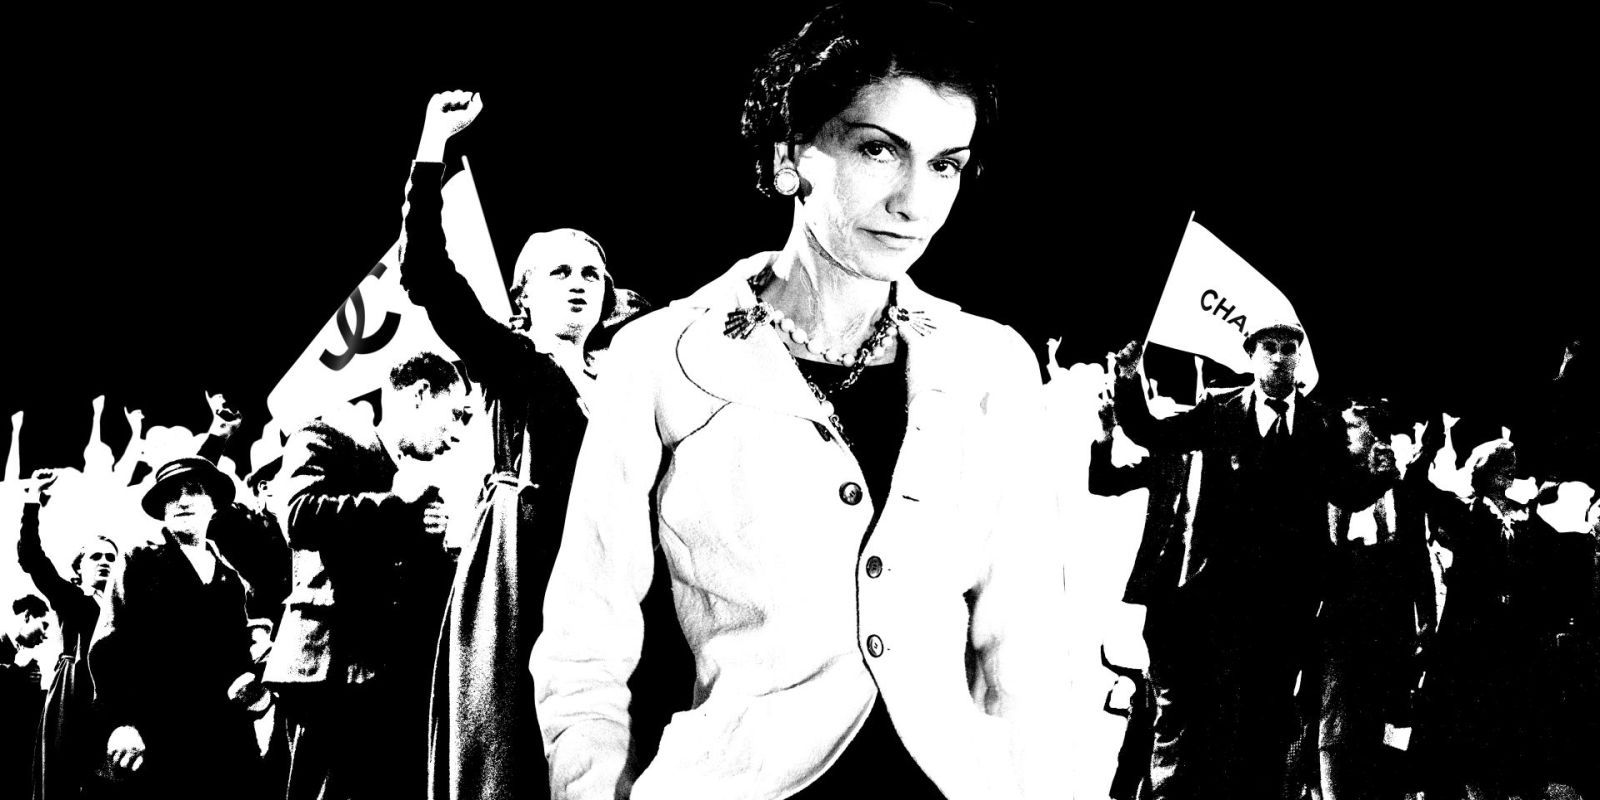 Icons before Instagram: How Coco Chanel changed the course of